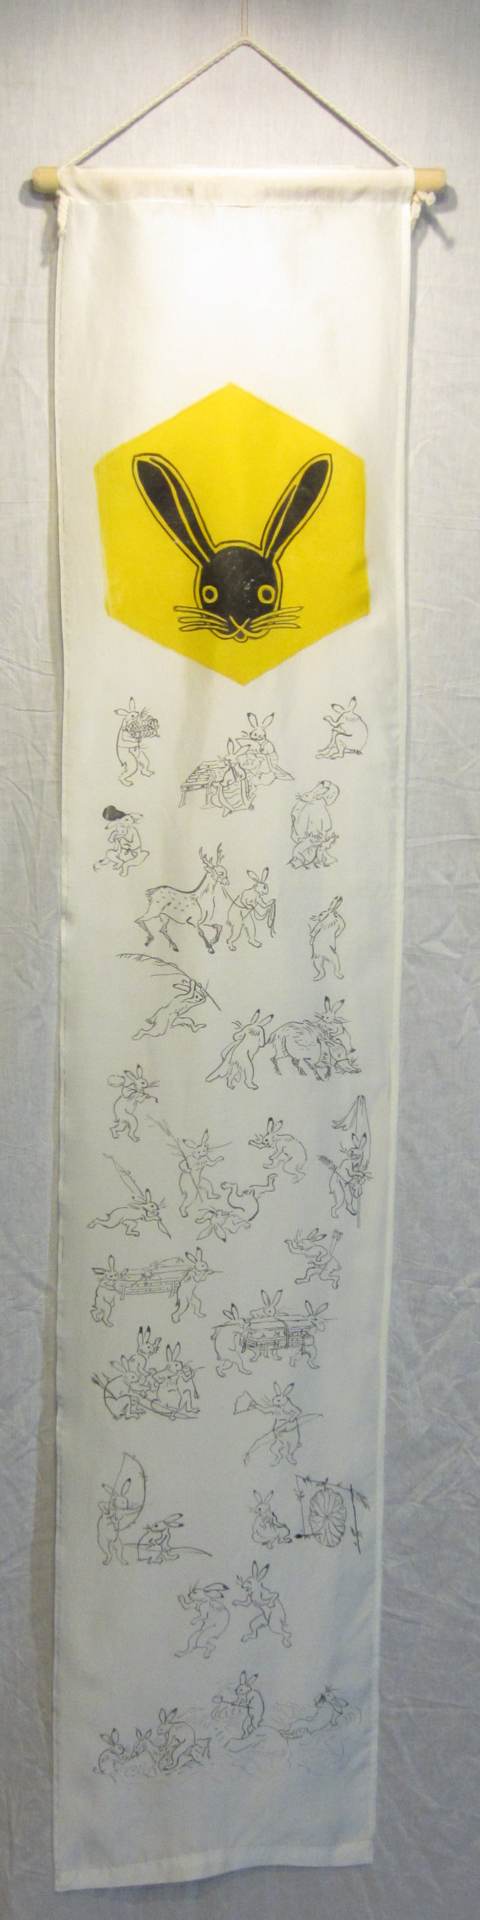 Silk banner with bunnies from the Choju Giga